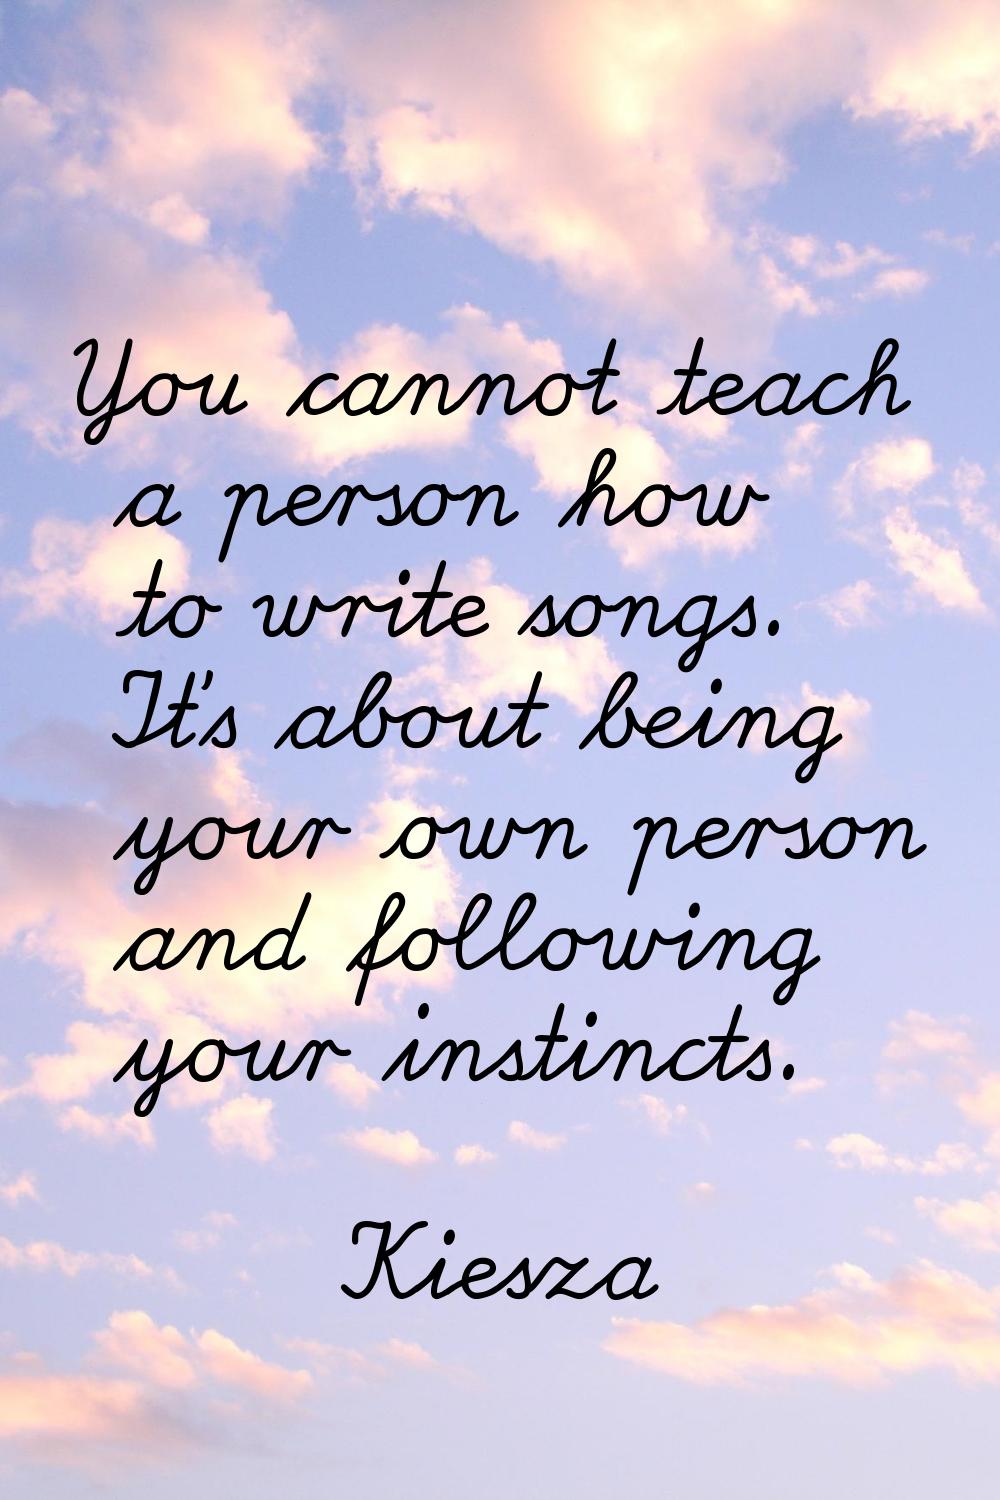 You cannot teach a person how to write songs. It's about being your own person and following your i